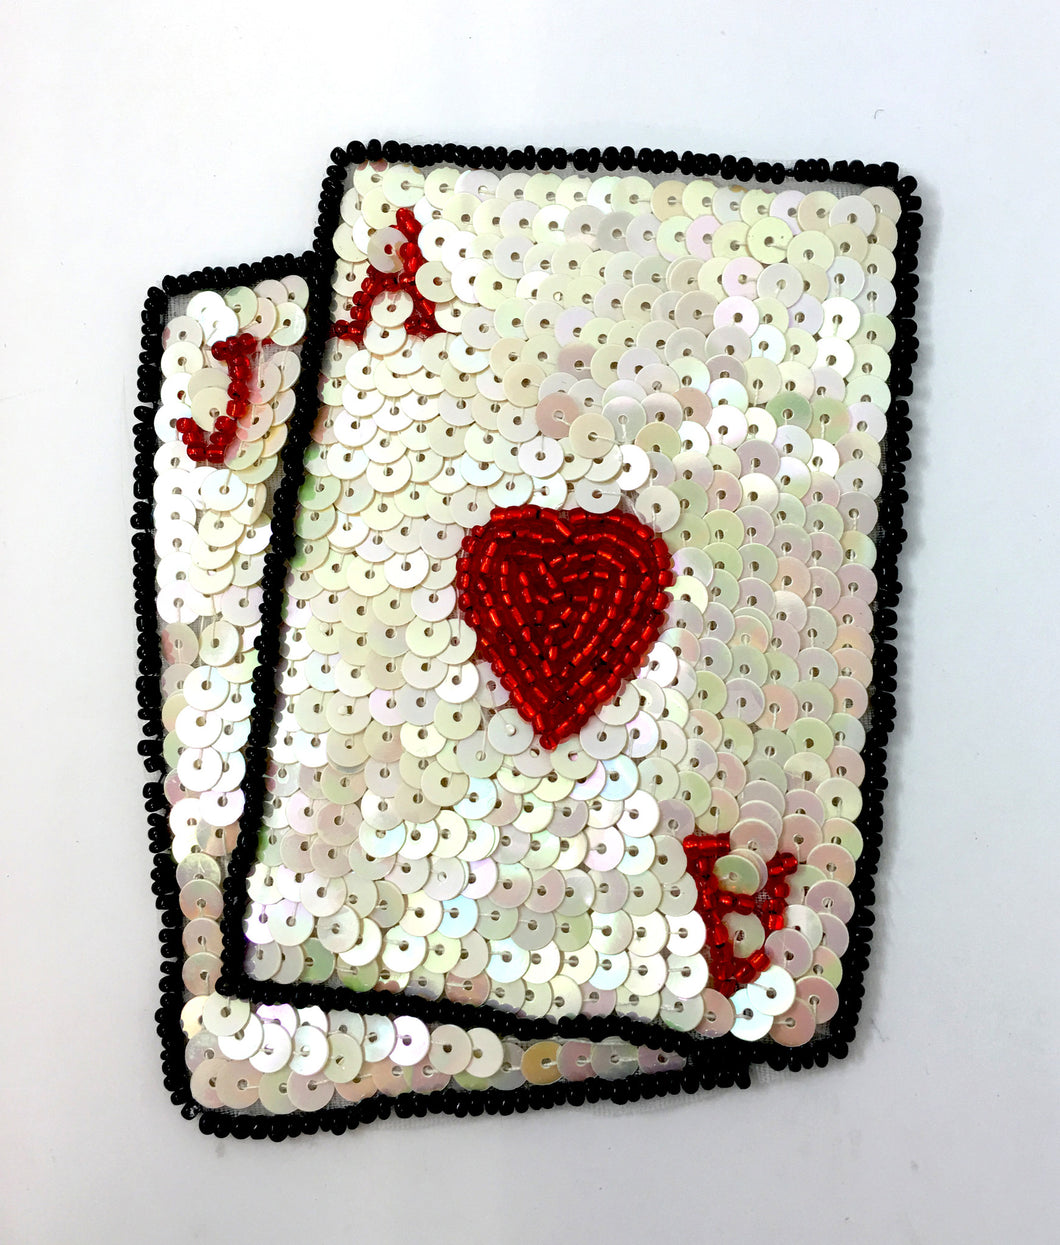 Choice of Suit Playing Card, White Sequins, Black/Red Beads 4